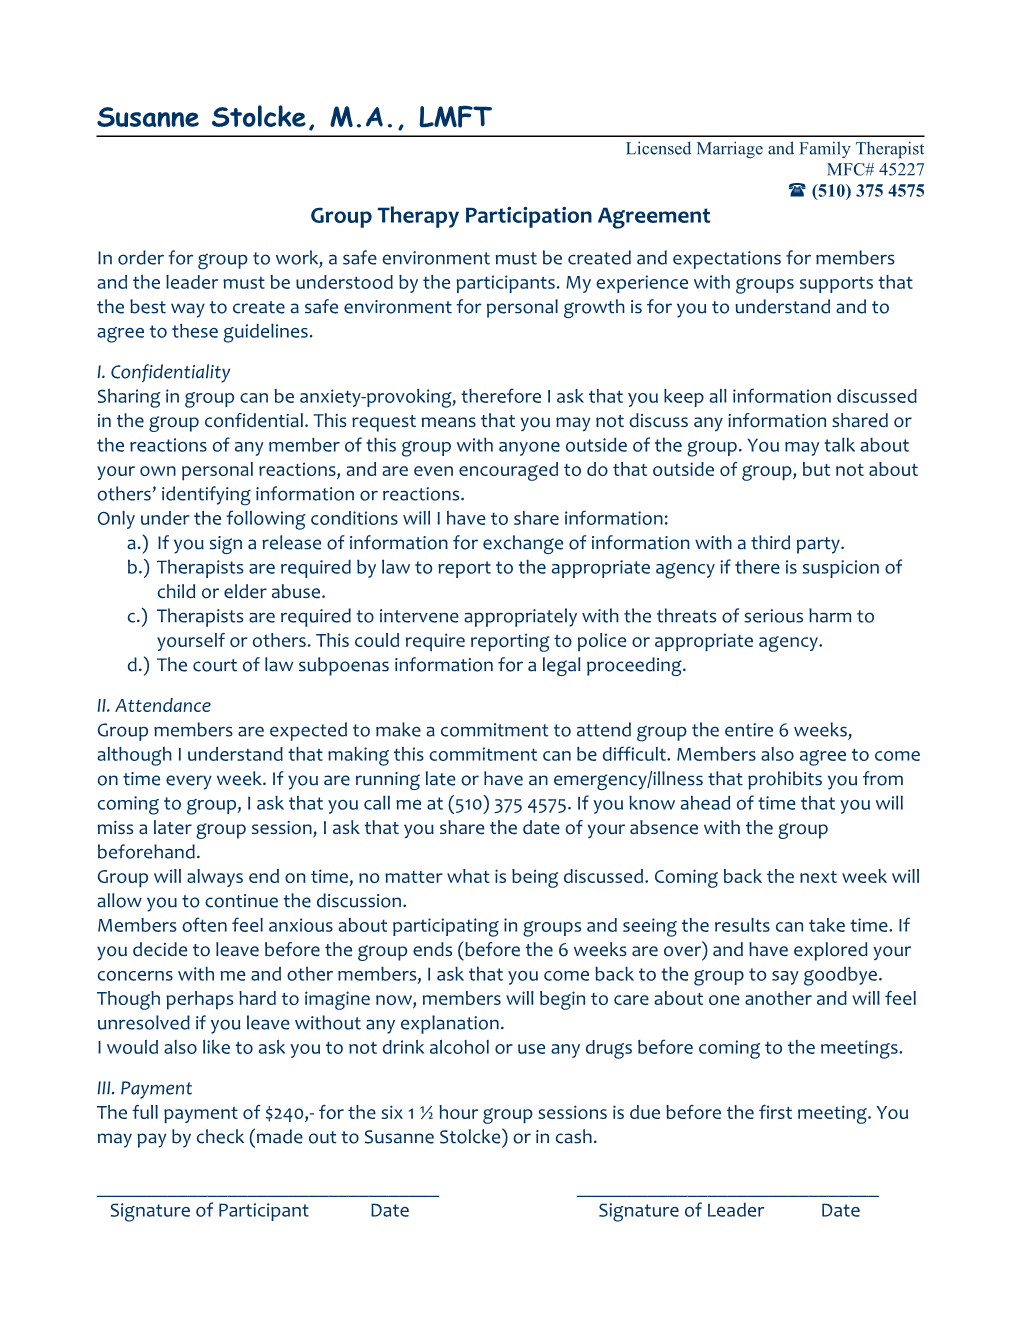 Group Therapy Participation Agreement